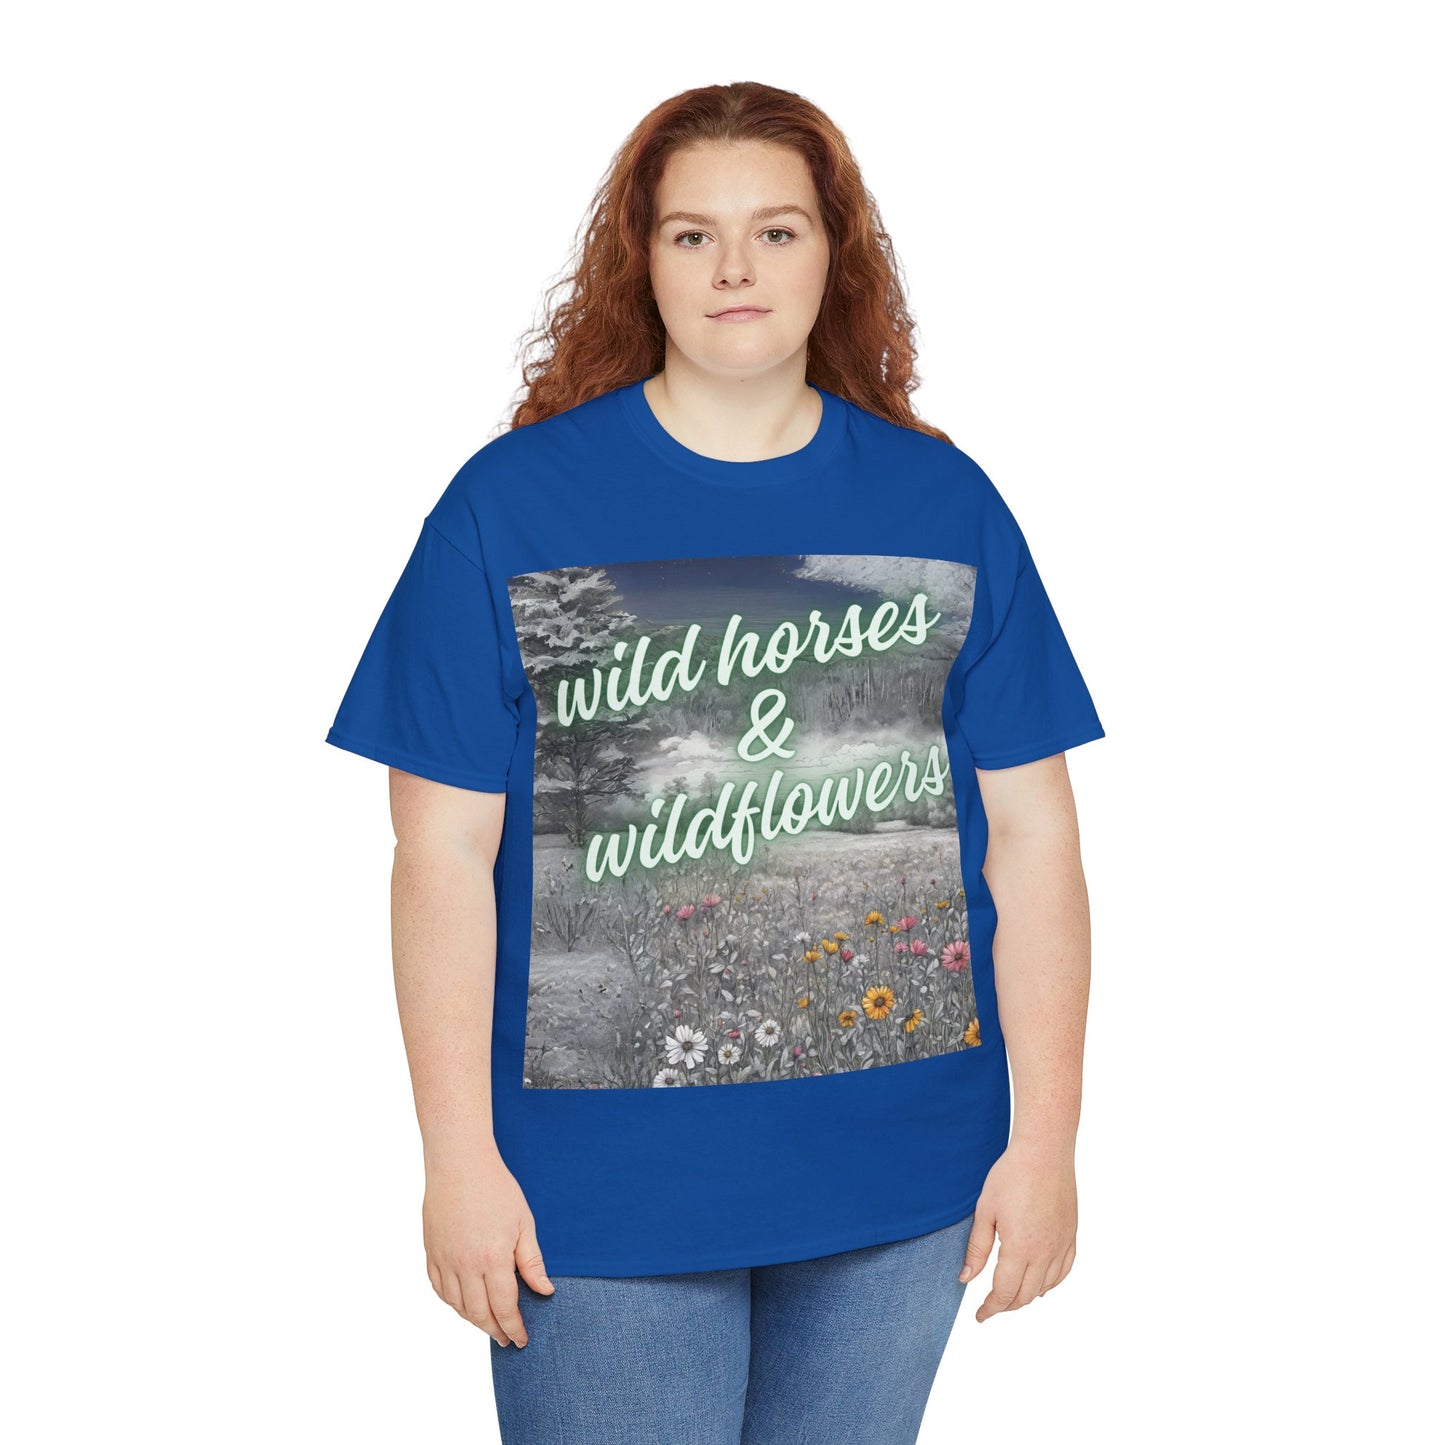 Wild Horses & Wildflowers Country Cowgirl Women's Plus Short Sleeved Cotton Tee Size xl-5xl